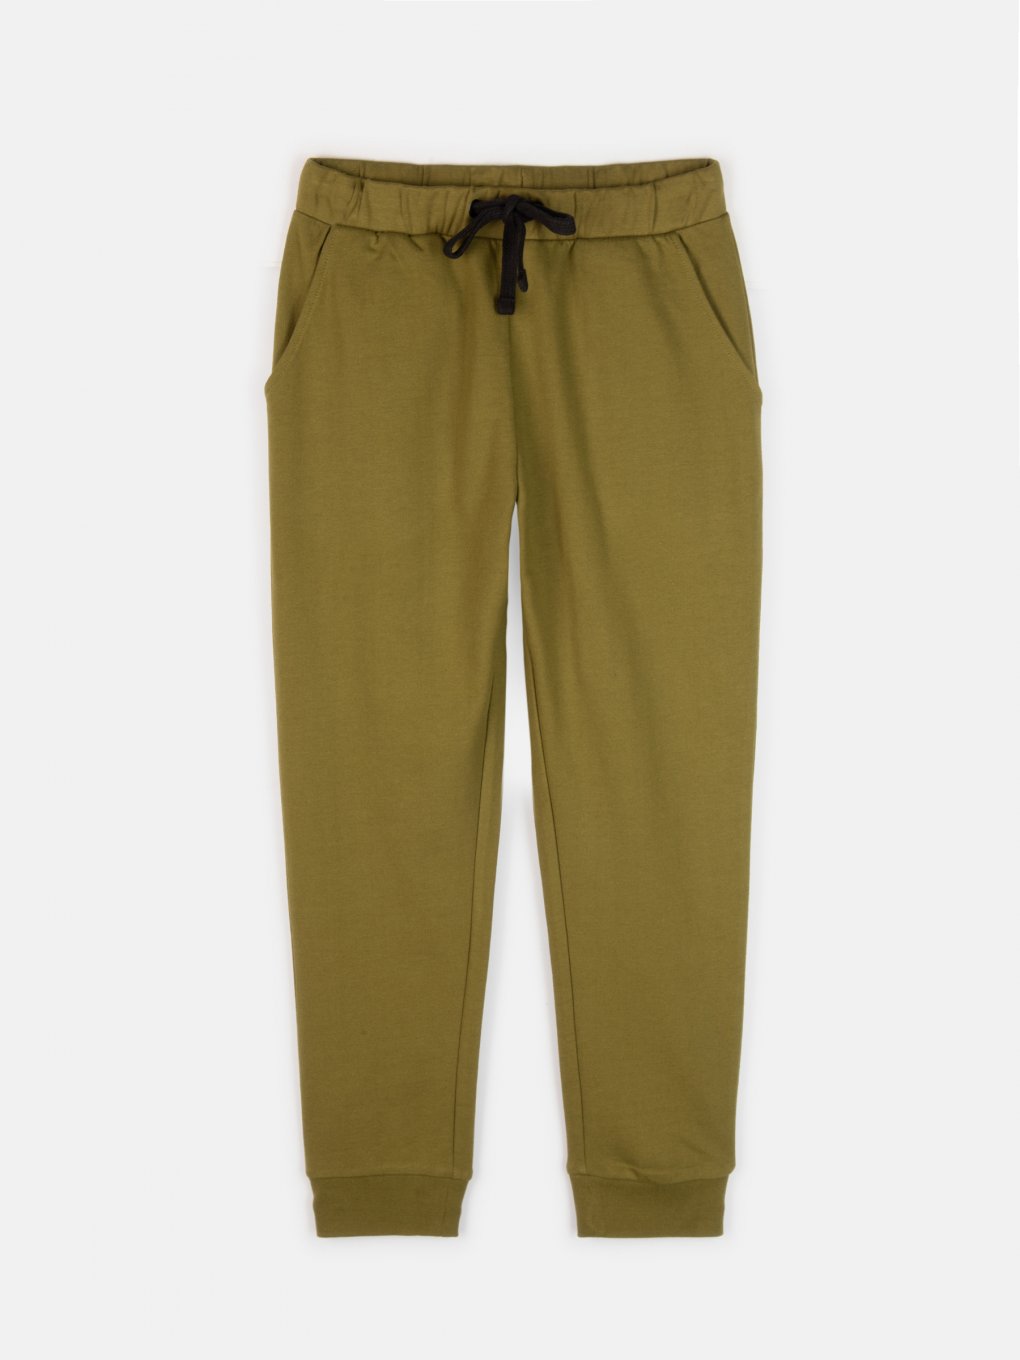 Basic sweatpants with contrast strings